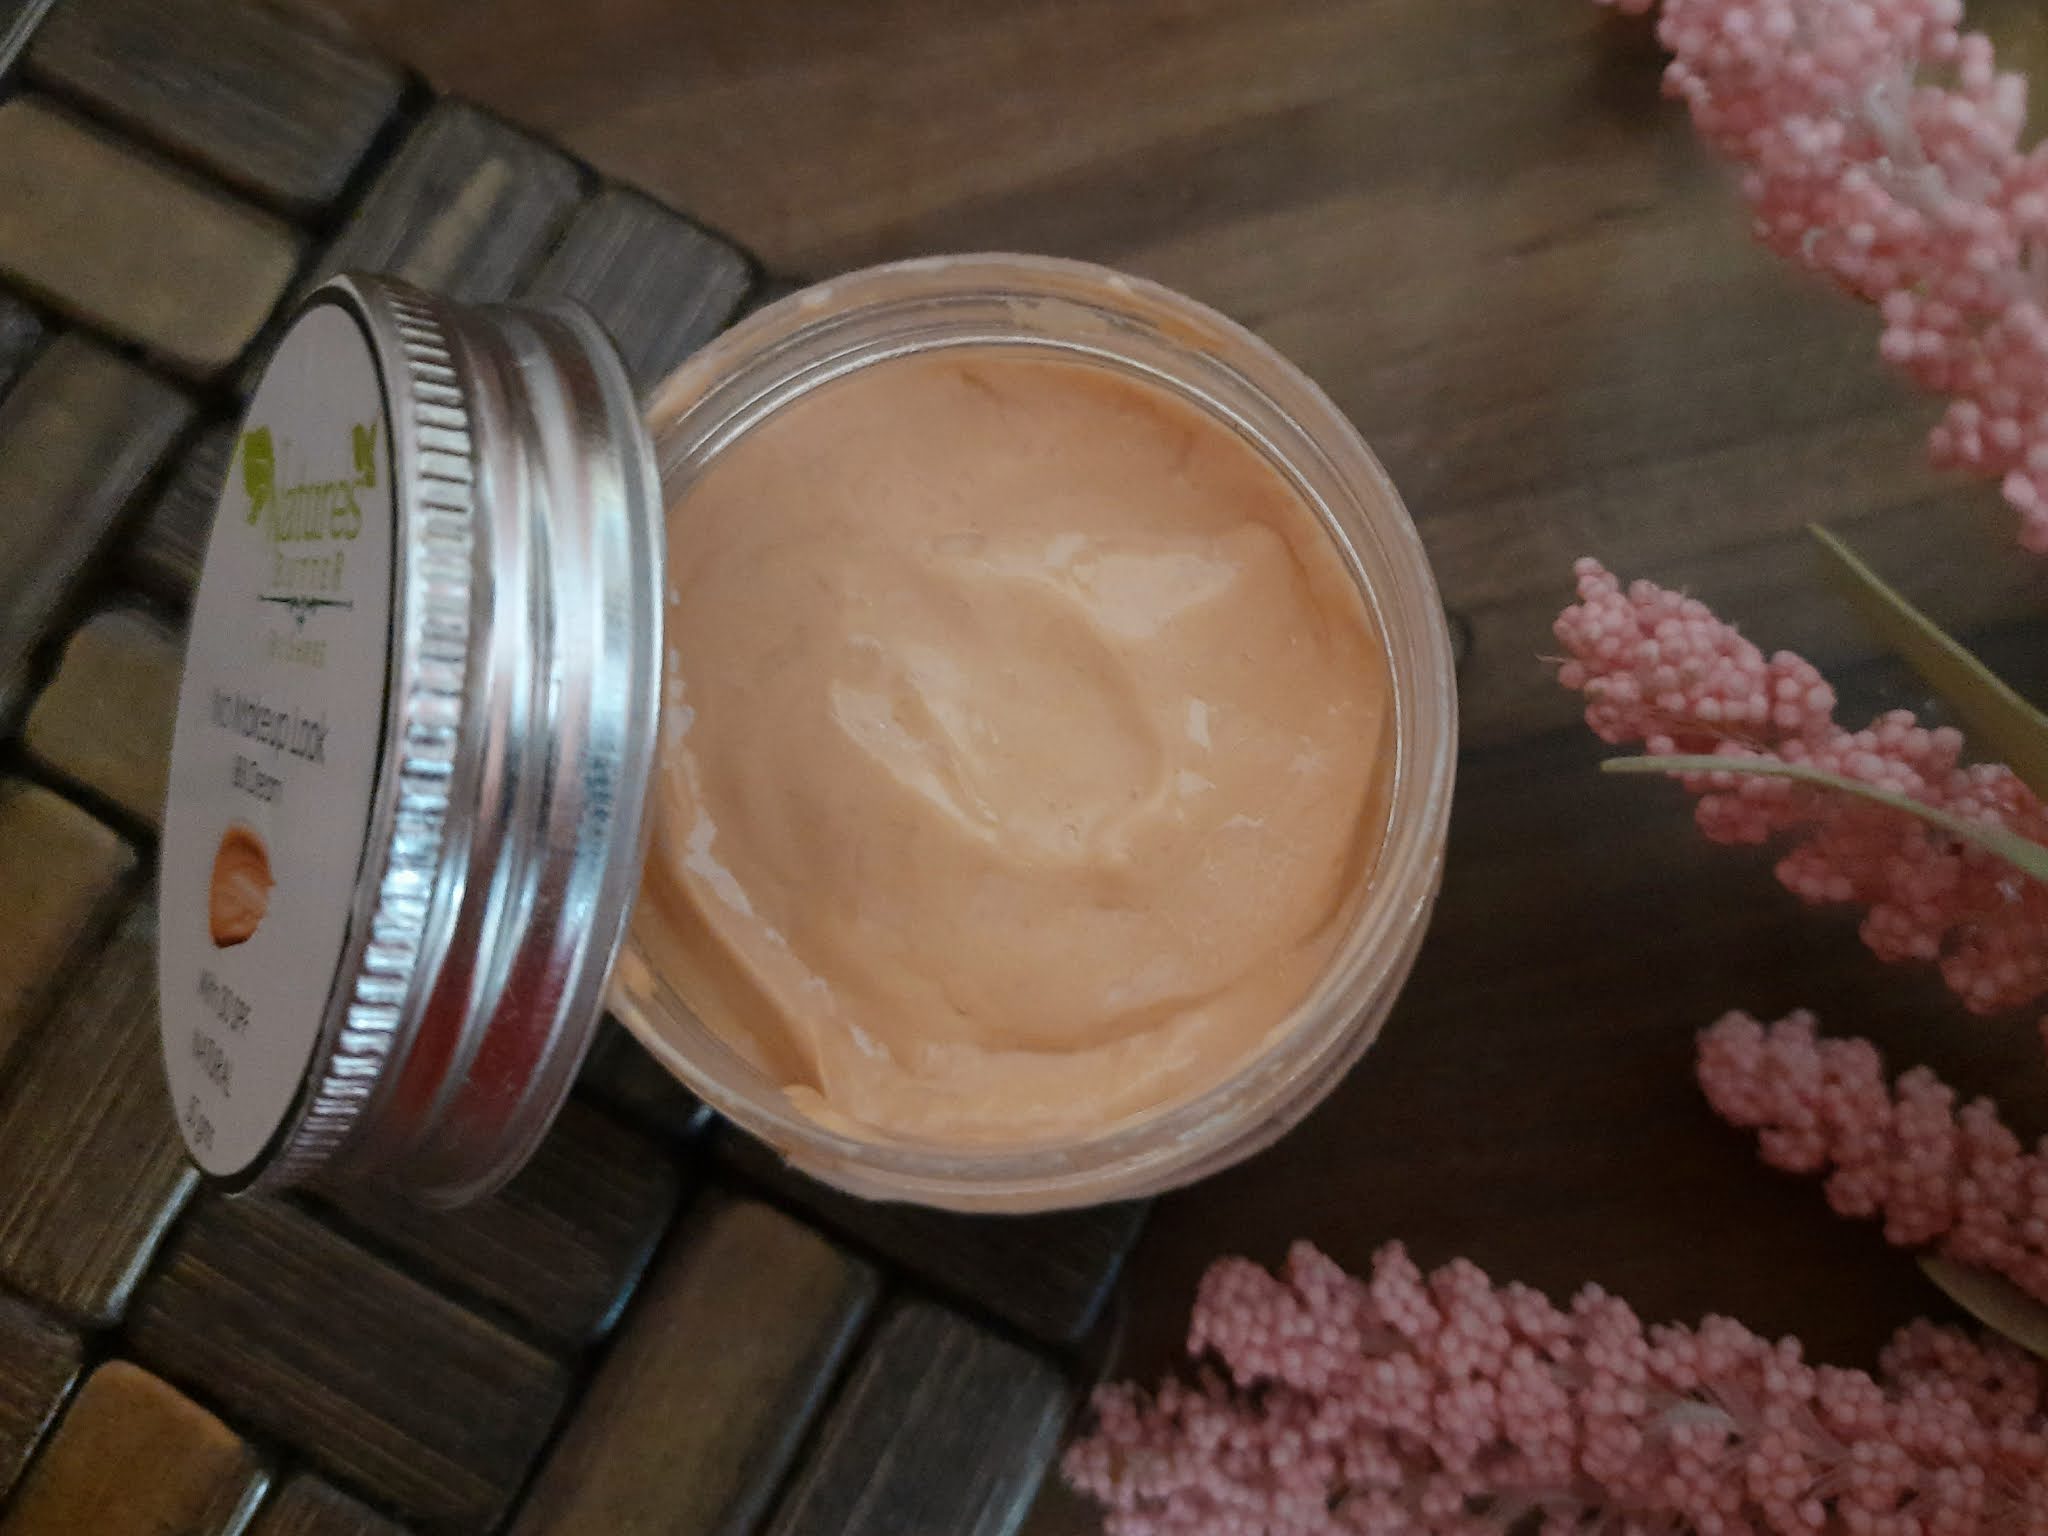 Natures Butter by Shree BB Cream